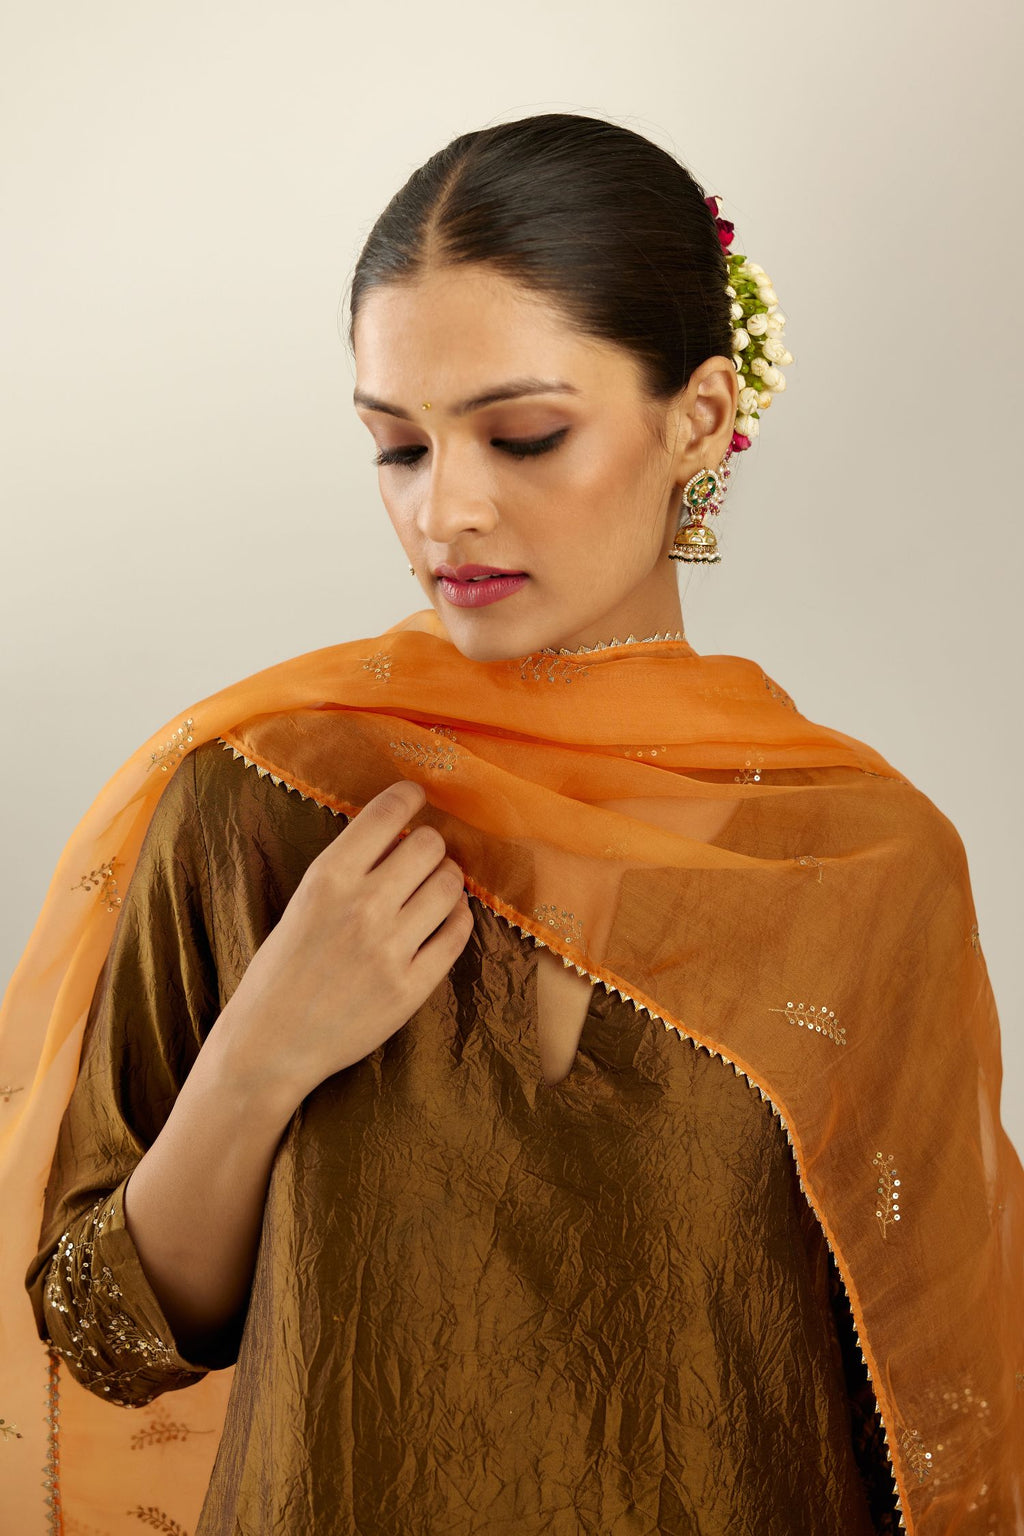 Orange silk organza dupatta with embroidered leaf clusters on all four corners of the dupatta and small leaf motif sprayed all over it.